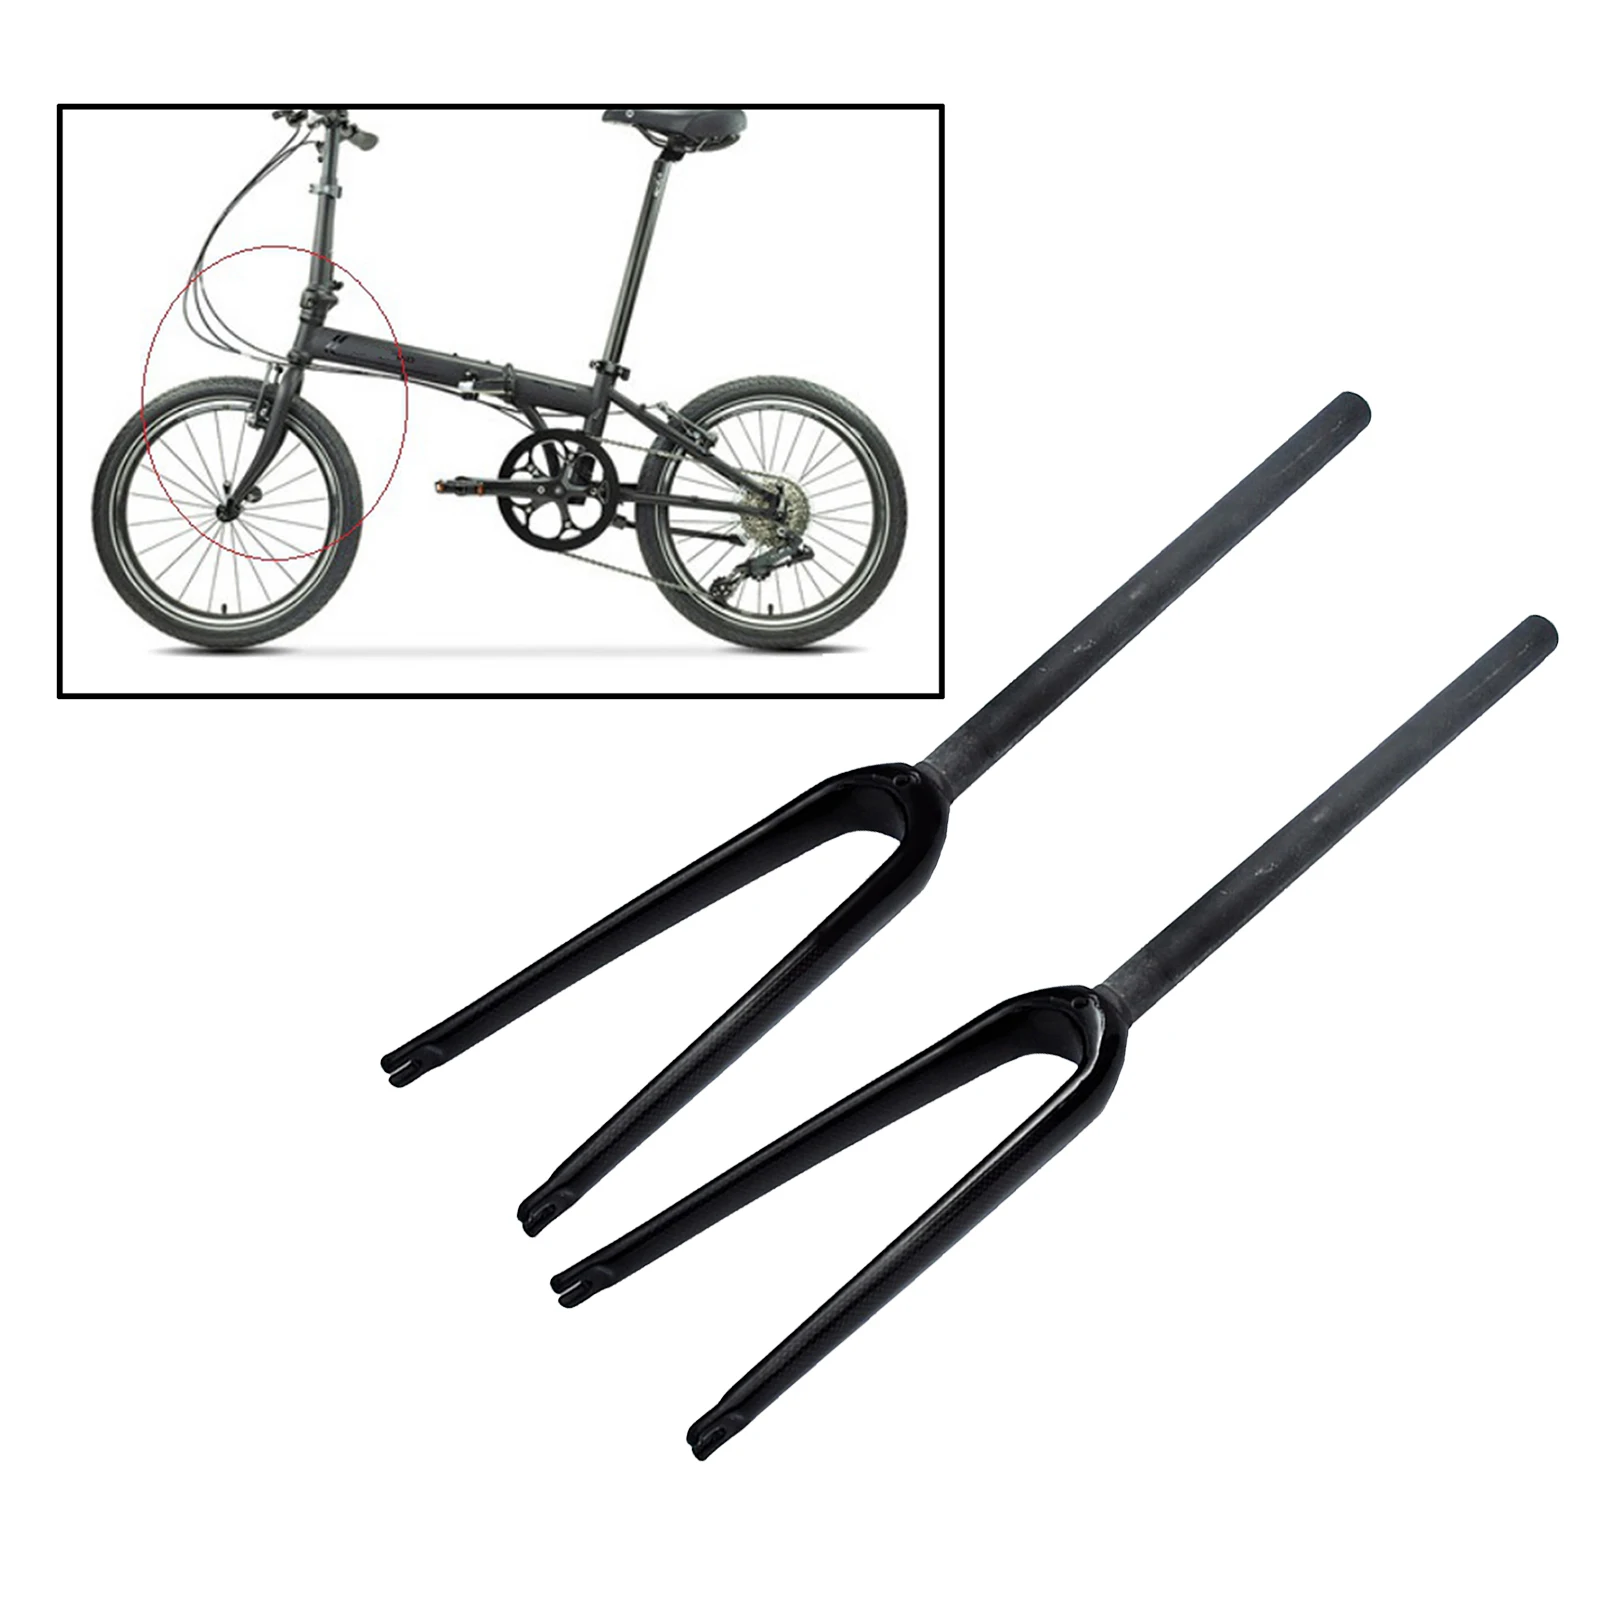 Deluxe 20 inch Rigid Fork Folding Bicycle MTB Road Cruiser Bike V-Brake Mounted 1-1/8 `` Replacement Fork Component Black